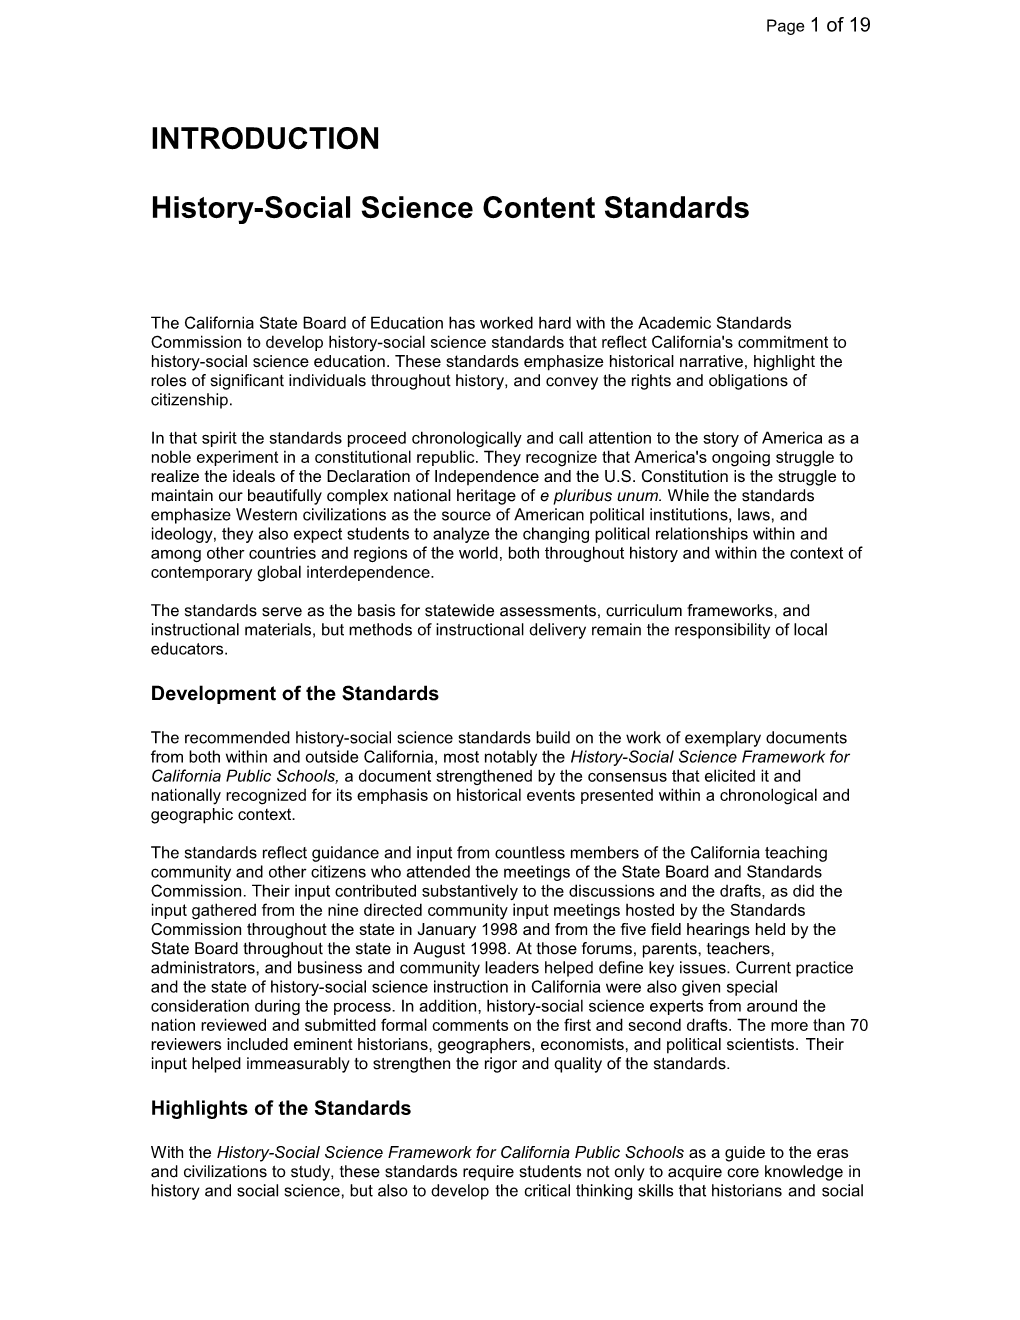 History Social Science Content Standards - Curriculum Frameworks and Instructional Resources